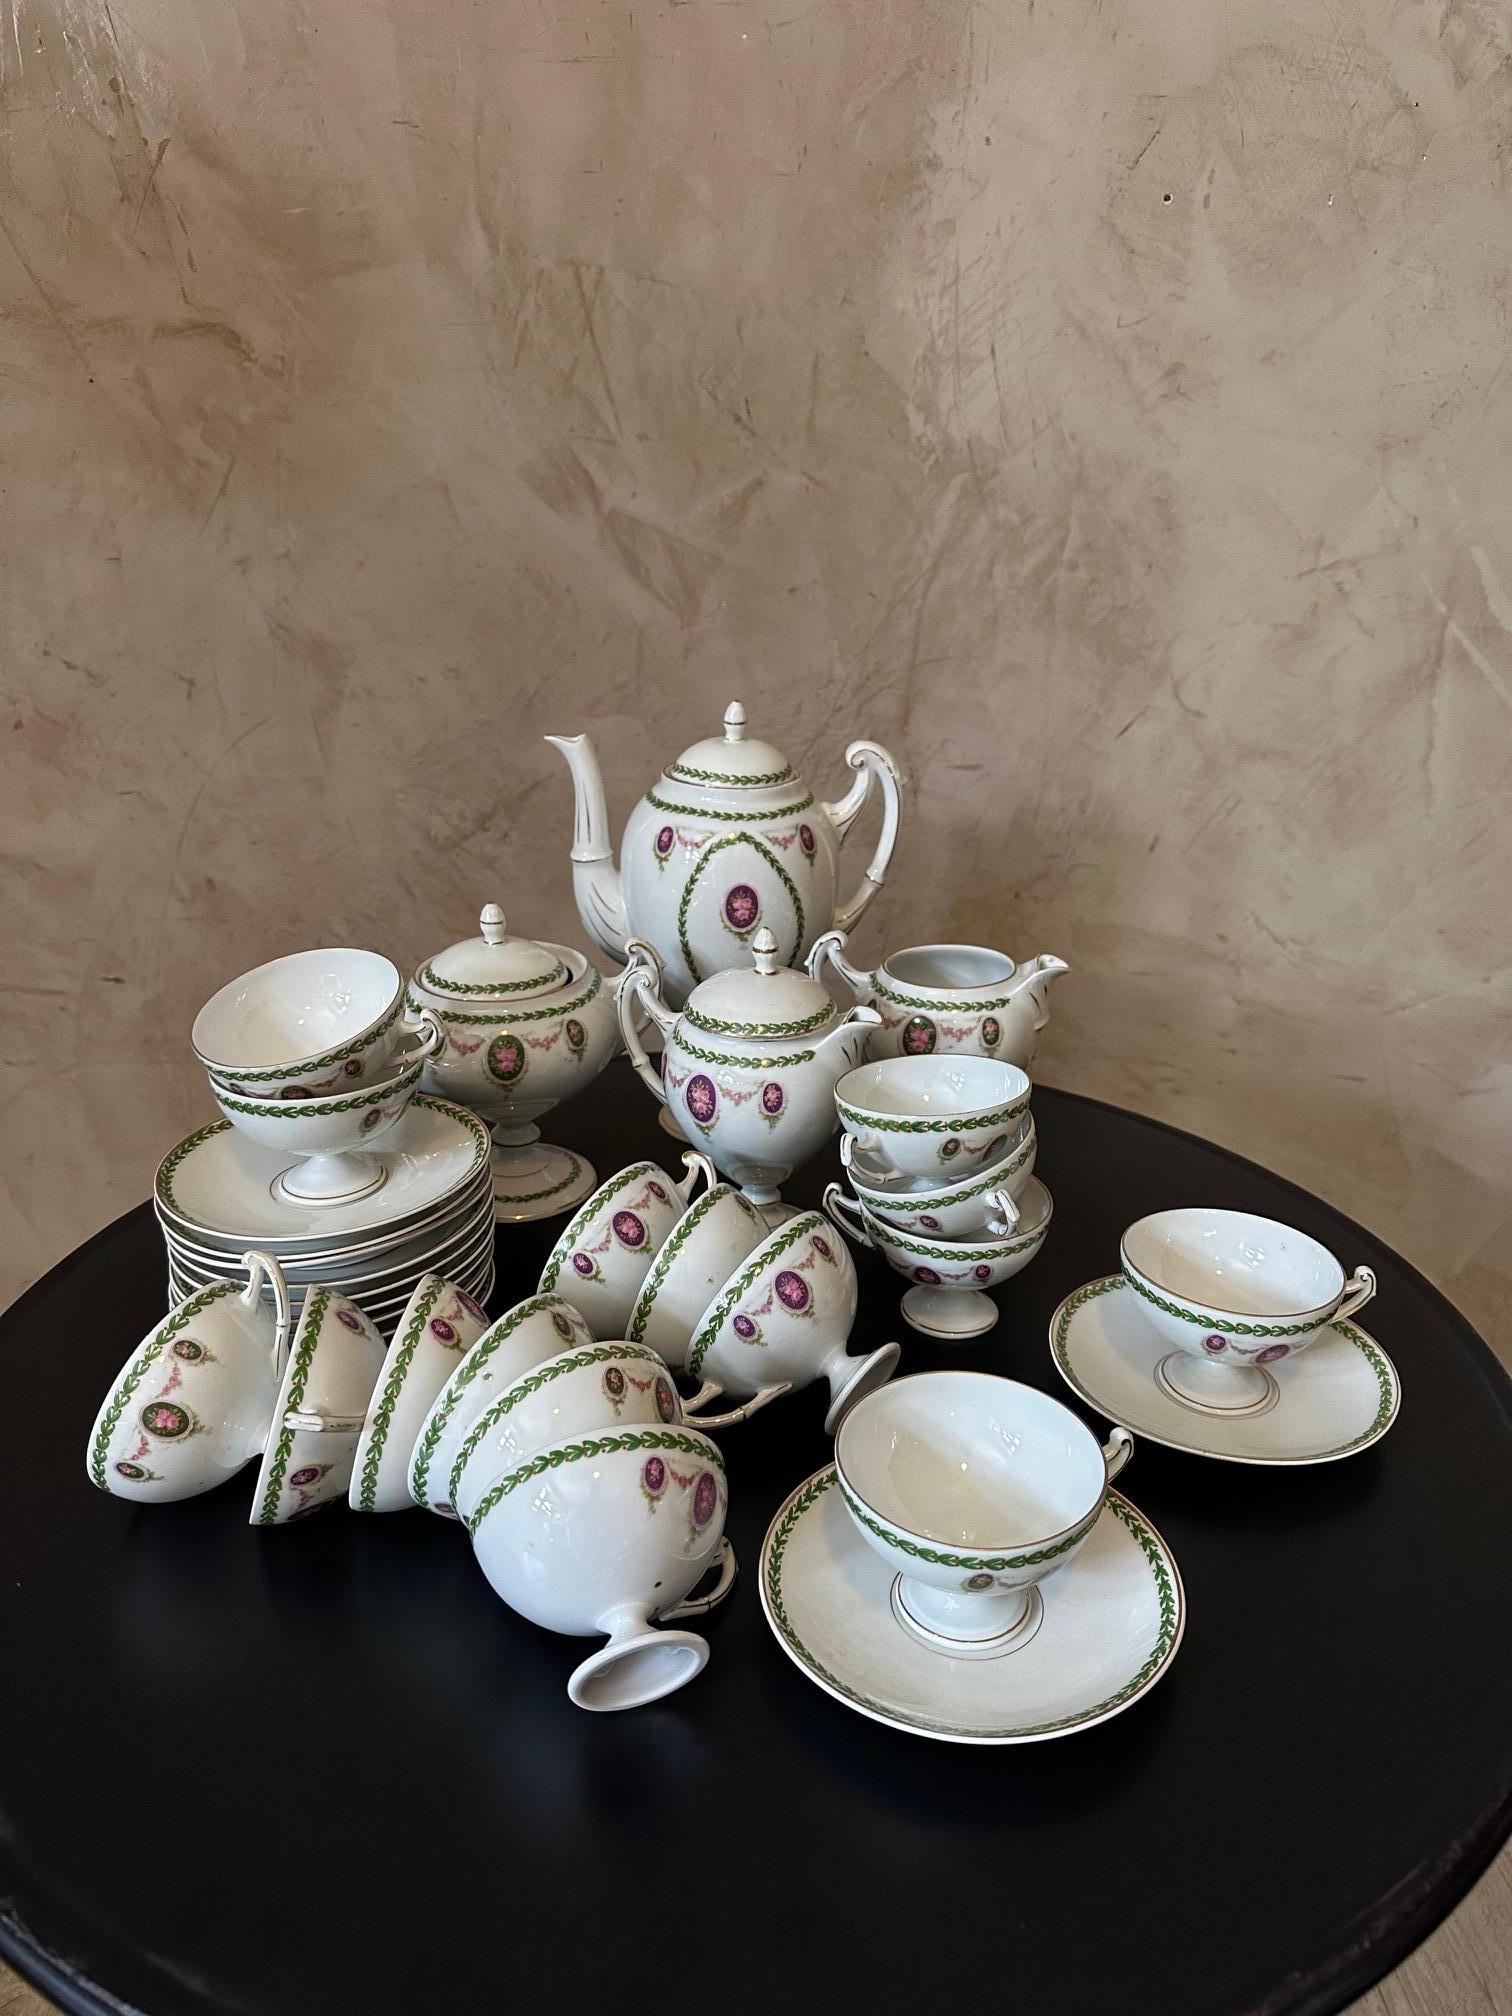 Very beautiful Louis XVI style coffee service dating from the 1930s in porcelain in very good condition consisting of:
- A coffe jug 
- Two milk jugs
- A sugar bowl
- 16 coffee cups
- 12 saucers
Pretty decoration of green laurel wreath and rose